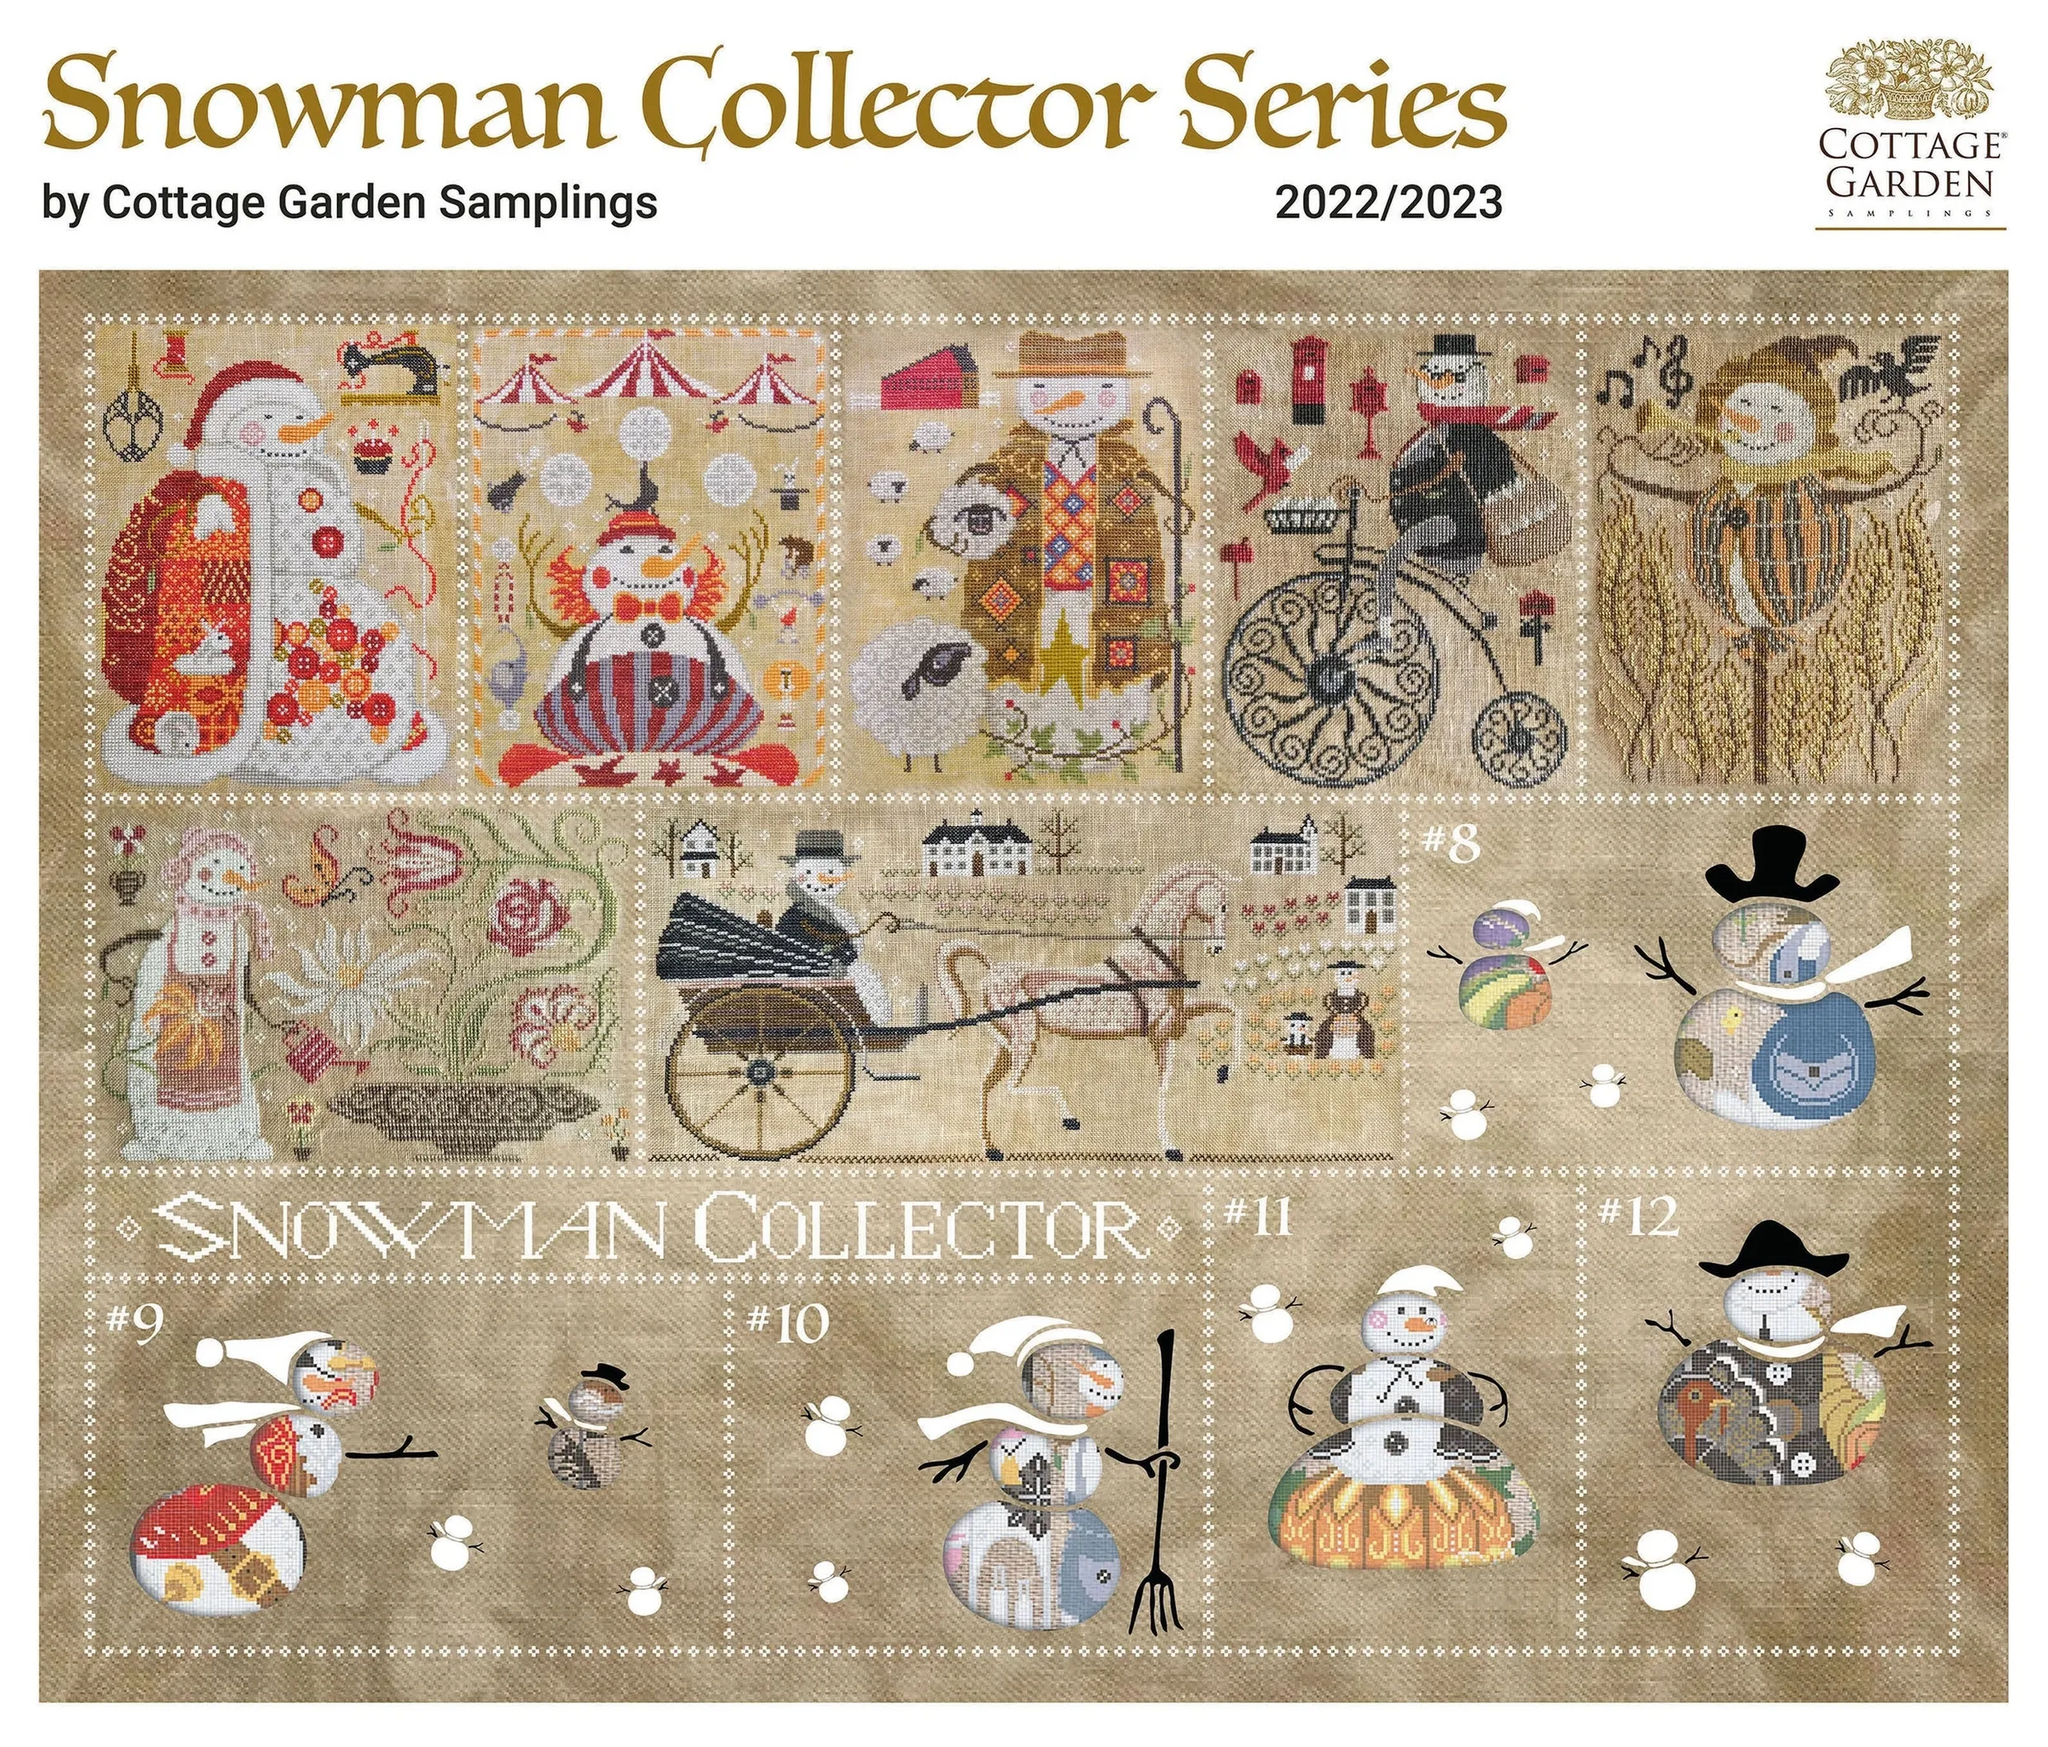 The Needleworker (1/12) - Snowman Collector series